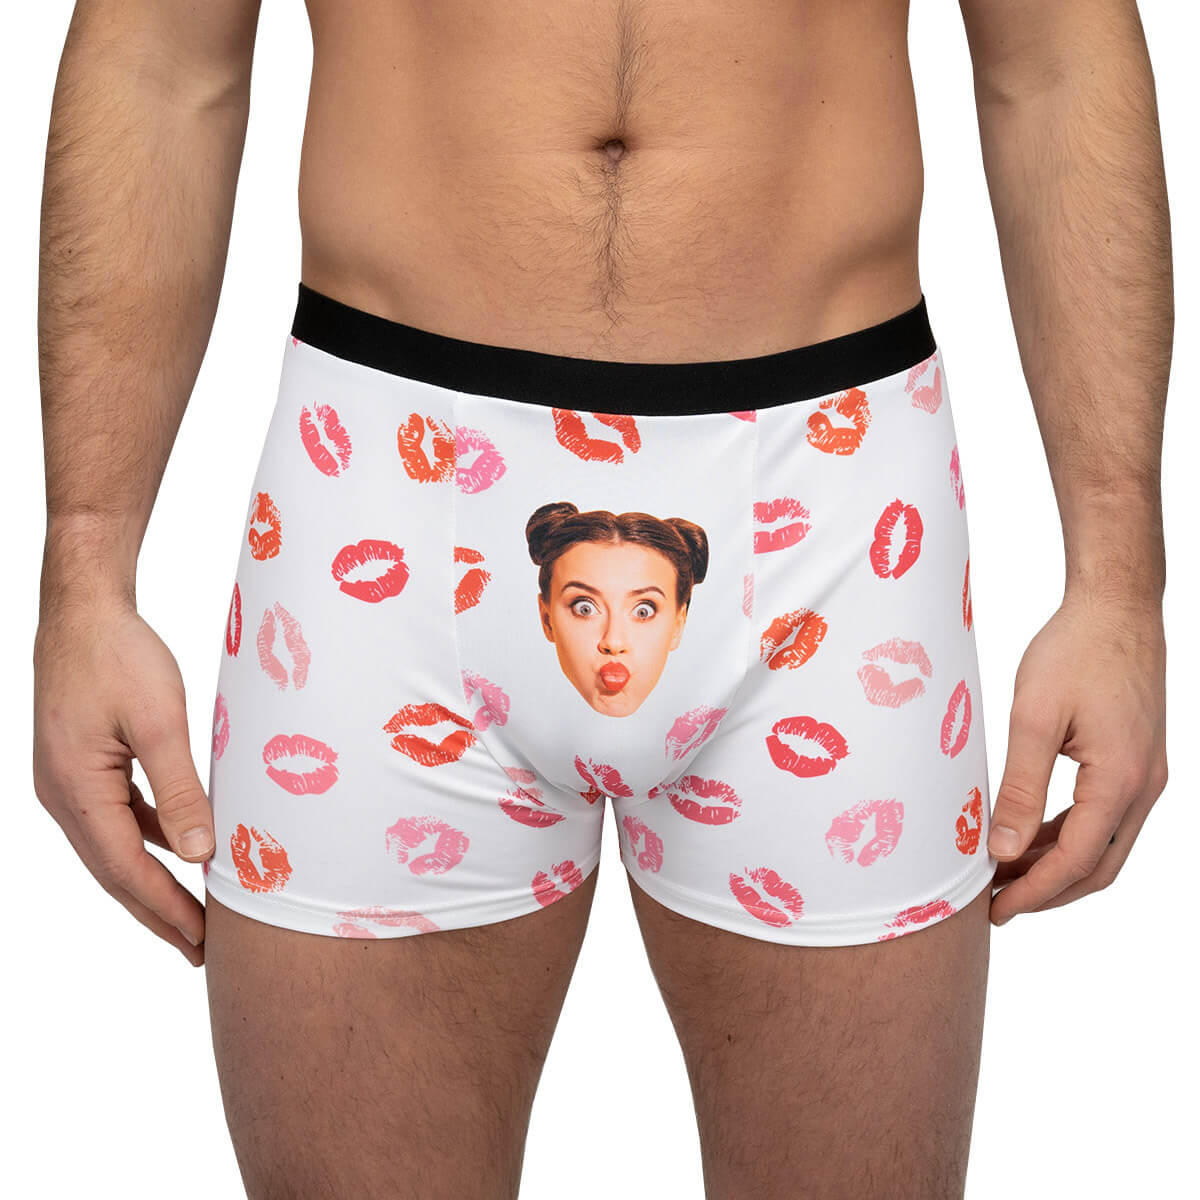 Personalised Boxers for Men Face on Boxers Custom Face Boxers Gift for Him  - MakePhotoPuzzleUK